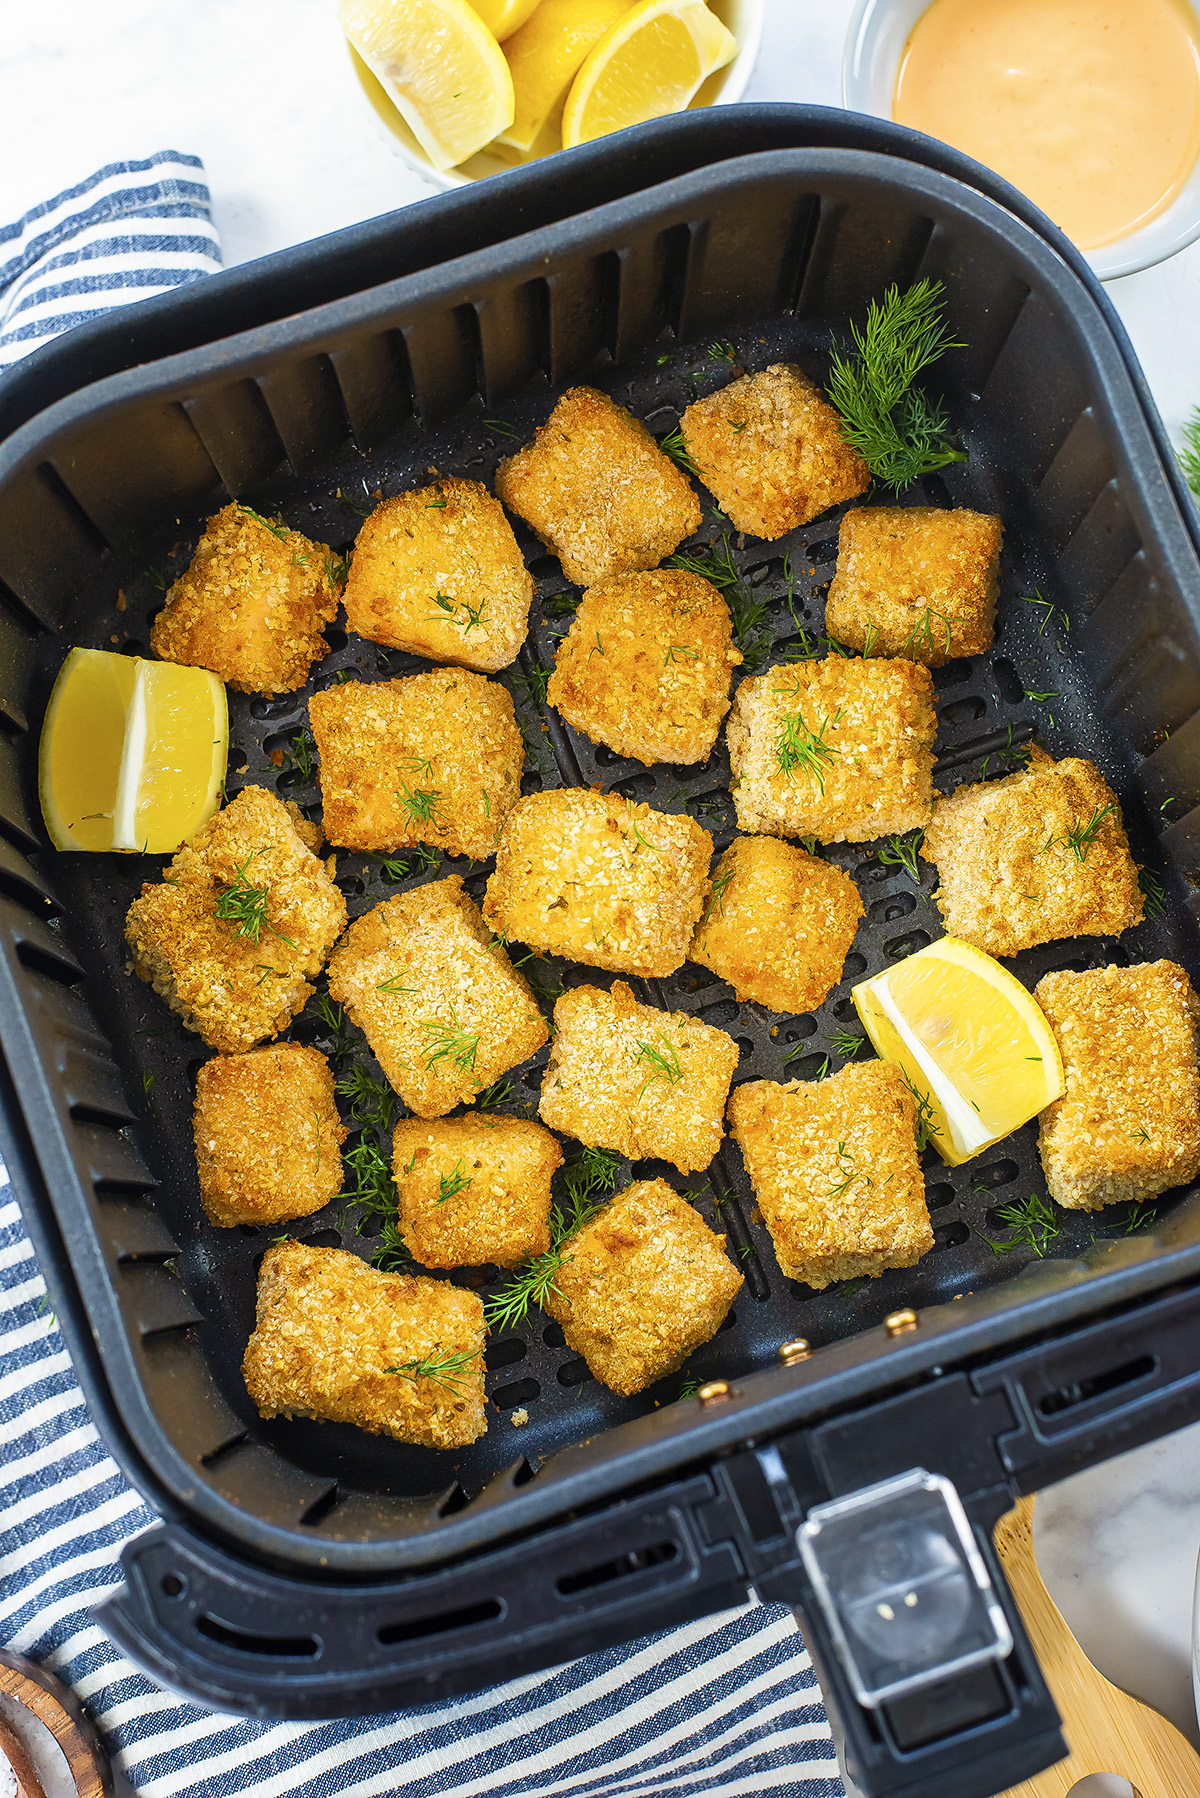 Overhead view of salmon nuggets in an air fryer basket.